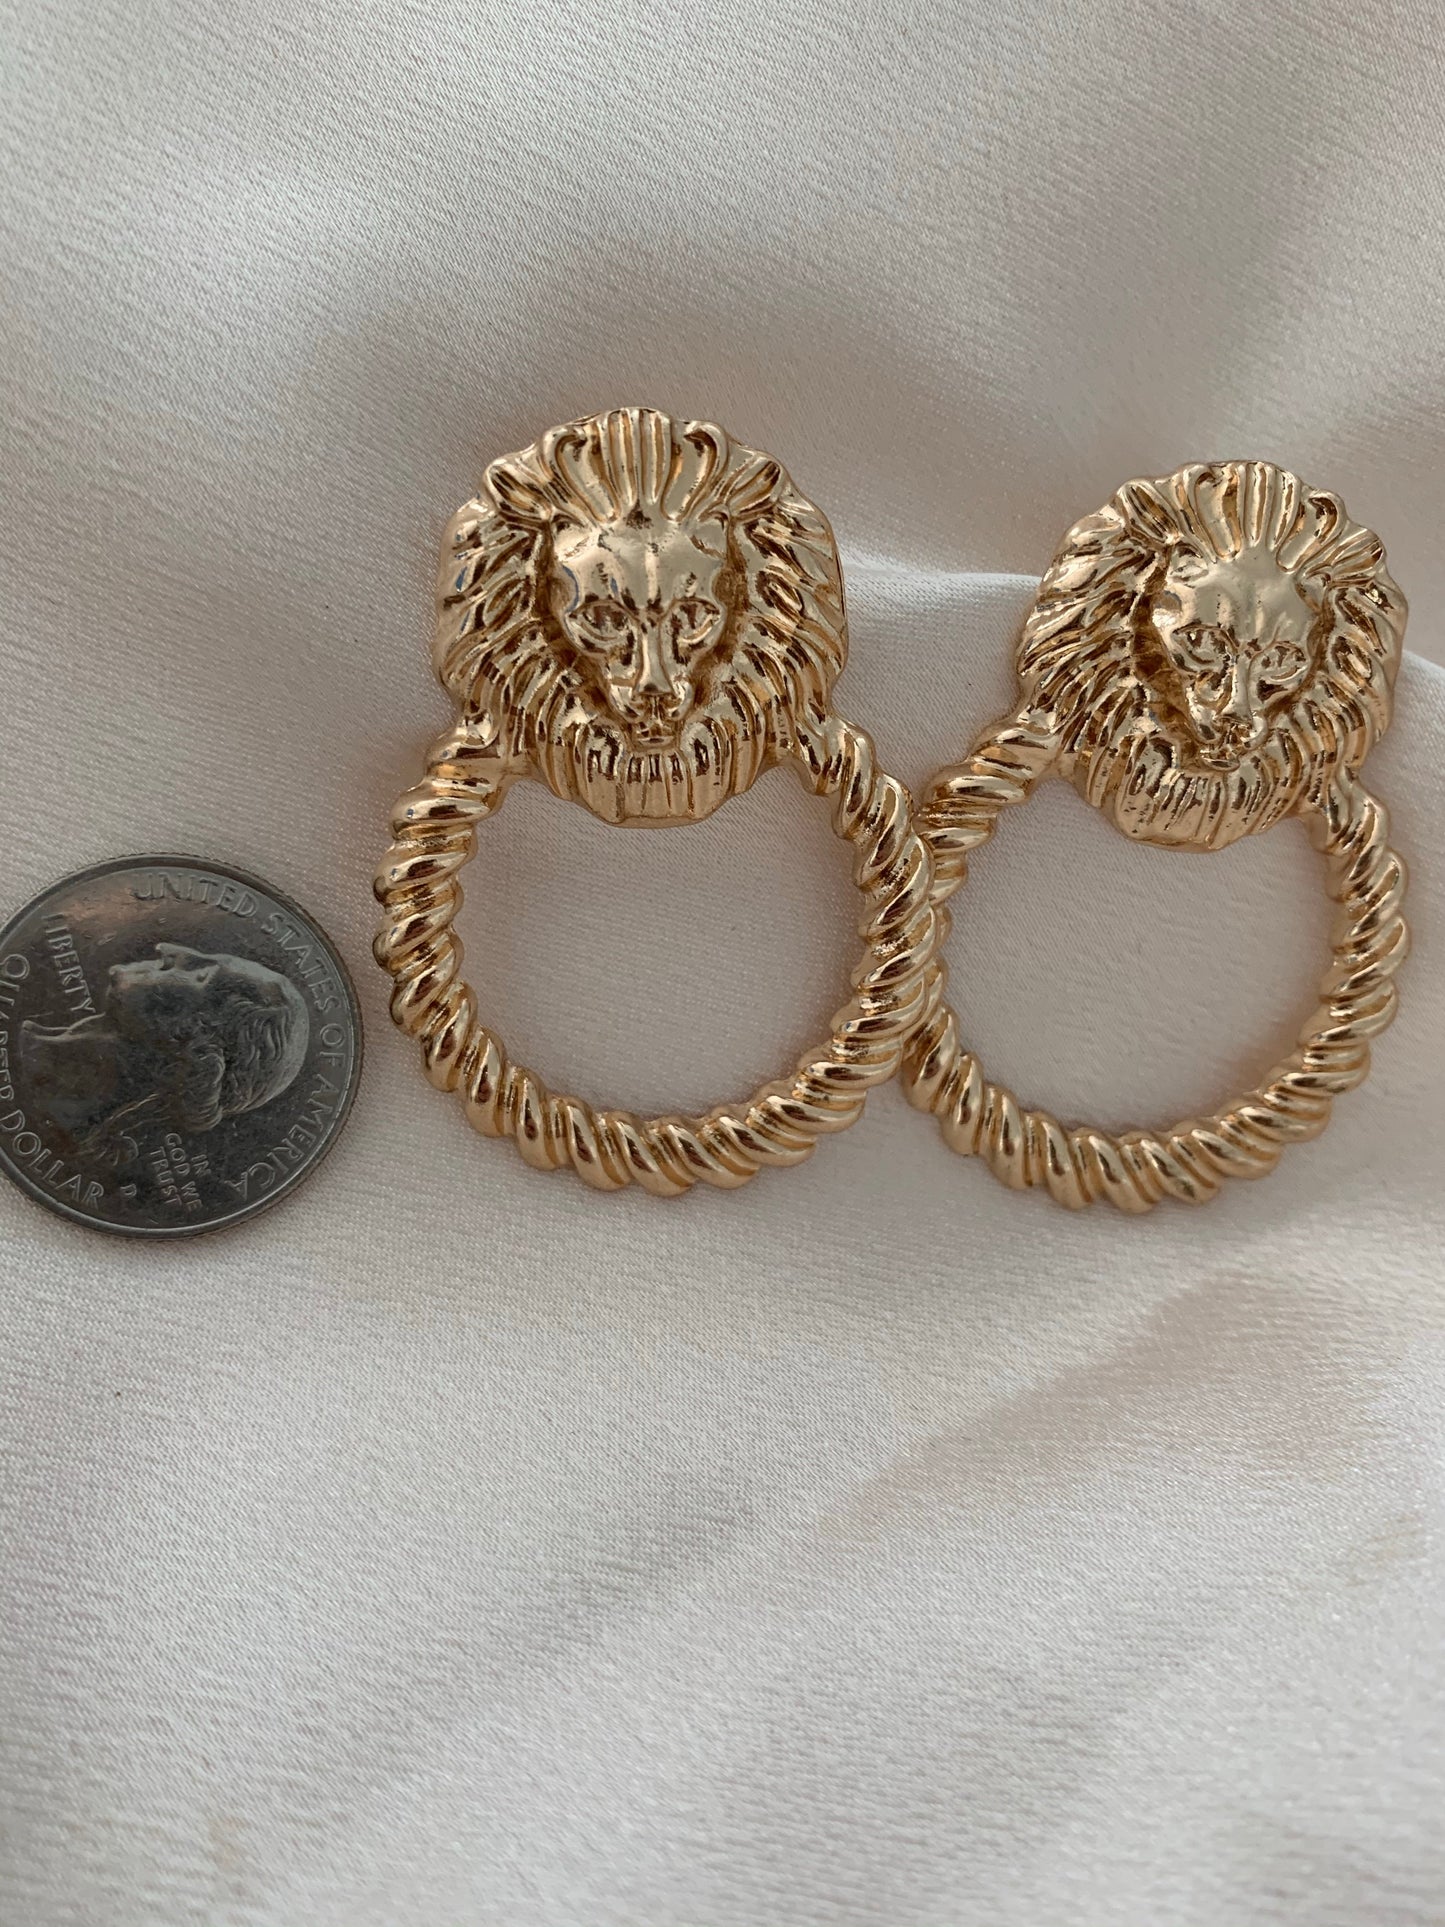 Leoncitos earrings